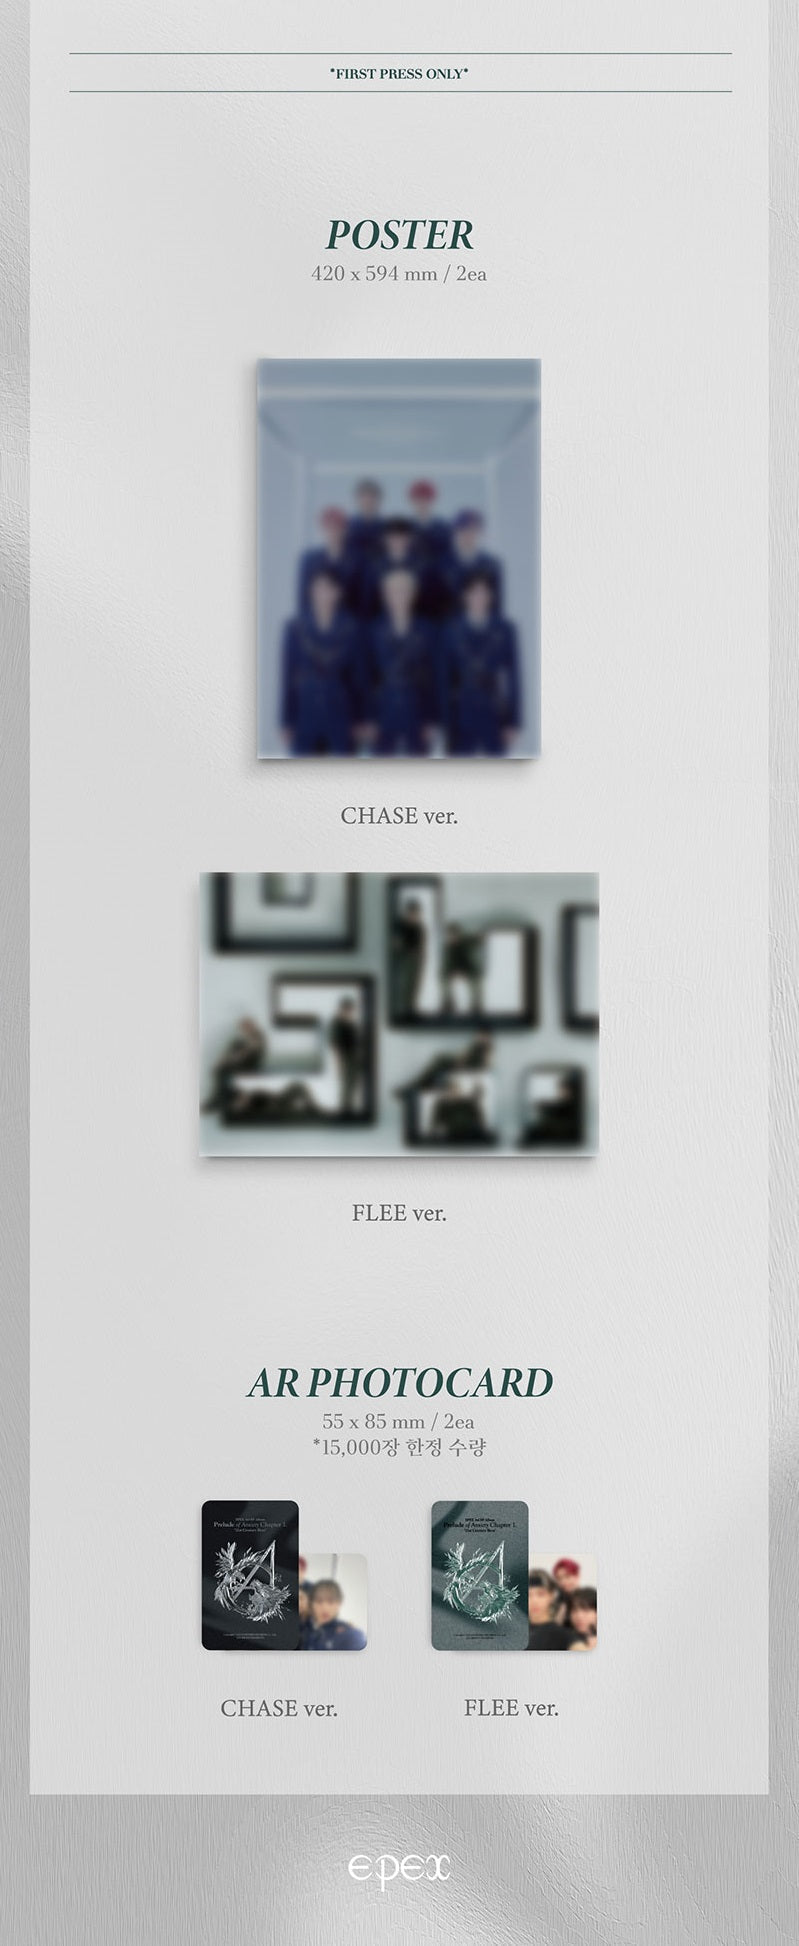 [PREORDER] EPEX - SIGNED ALBUM 3RD EP ALBUM PRELUDE OF ANXIETY CHAPTER 1. 21ST CENTRY BOYS SET VERSION